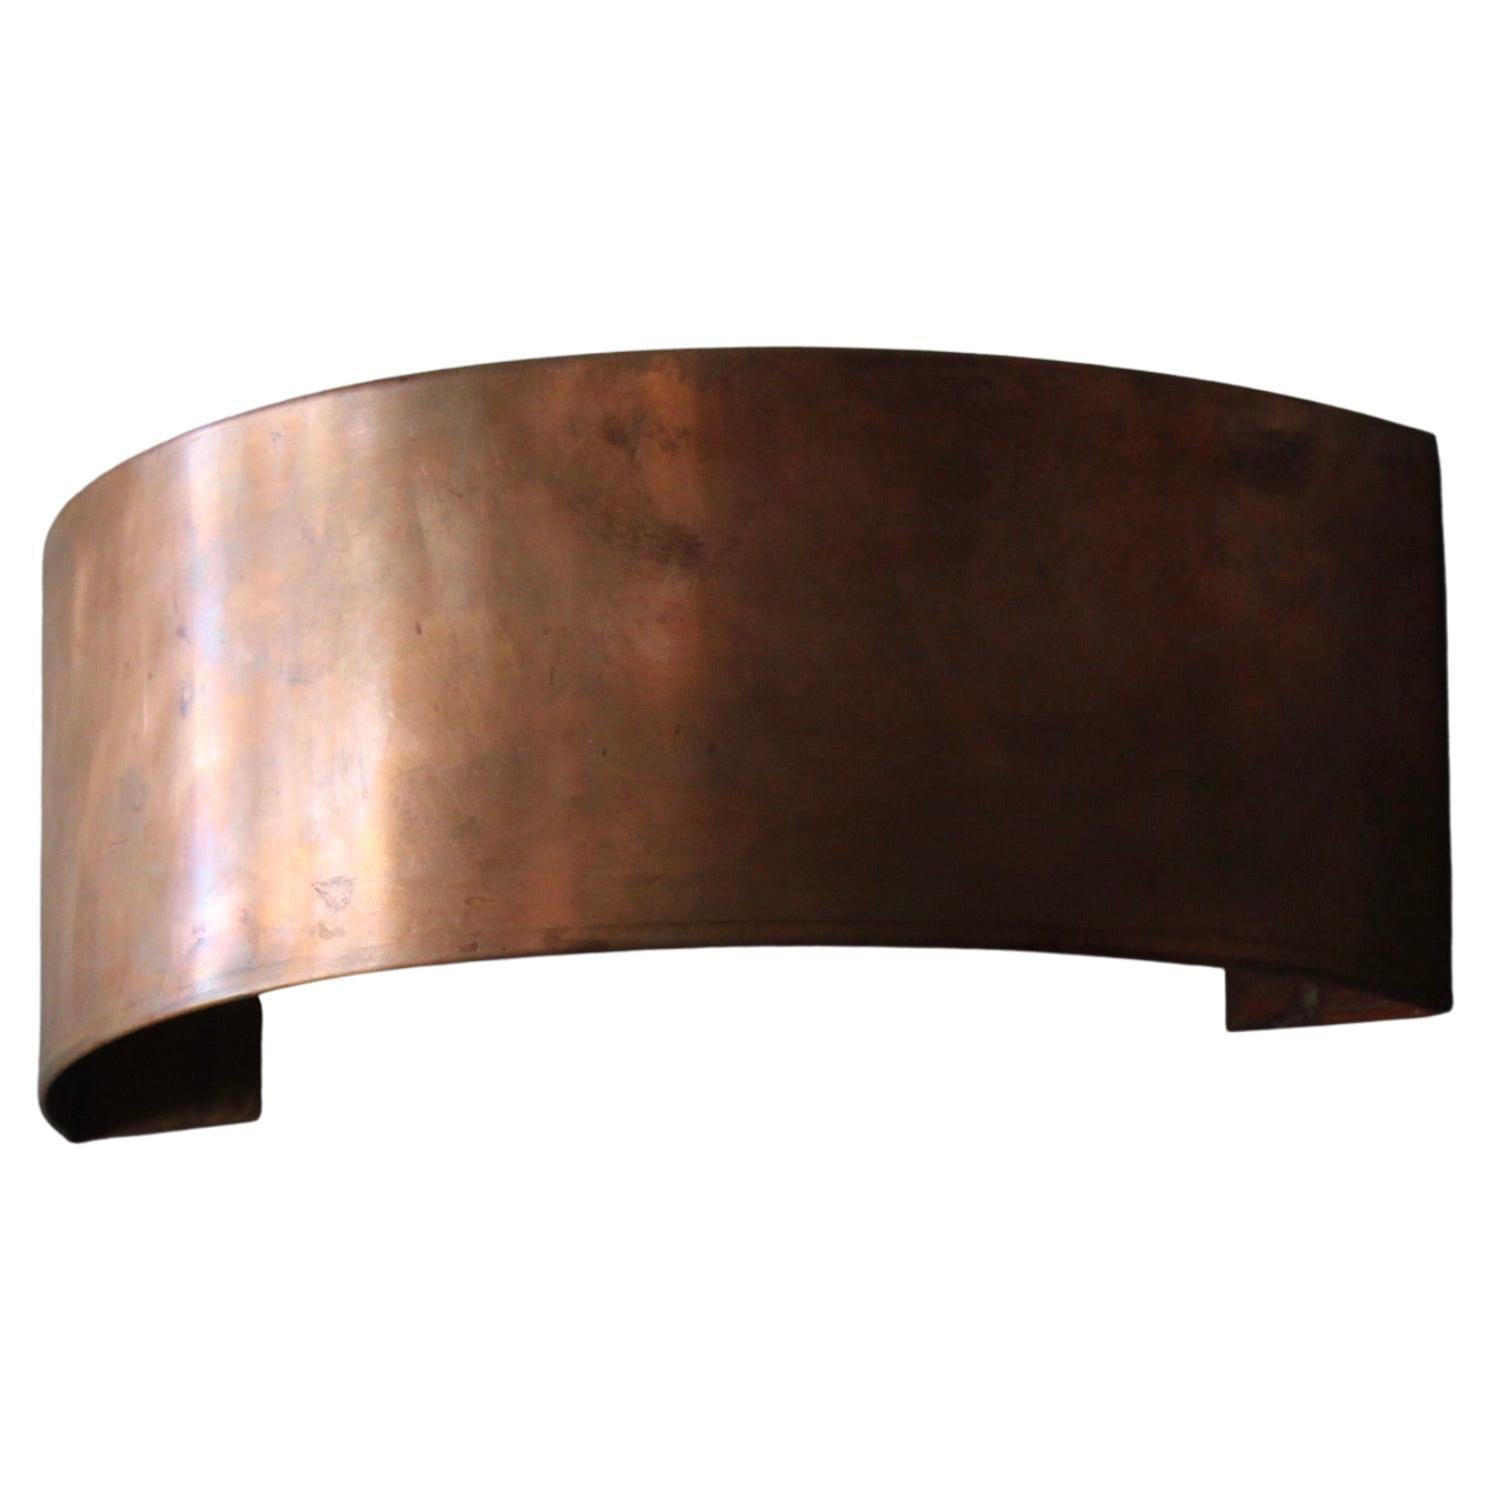 American Craft, Wall Light Sconce, Copper, United States, c. 1970s For Sale